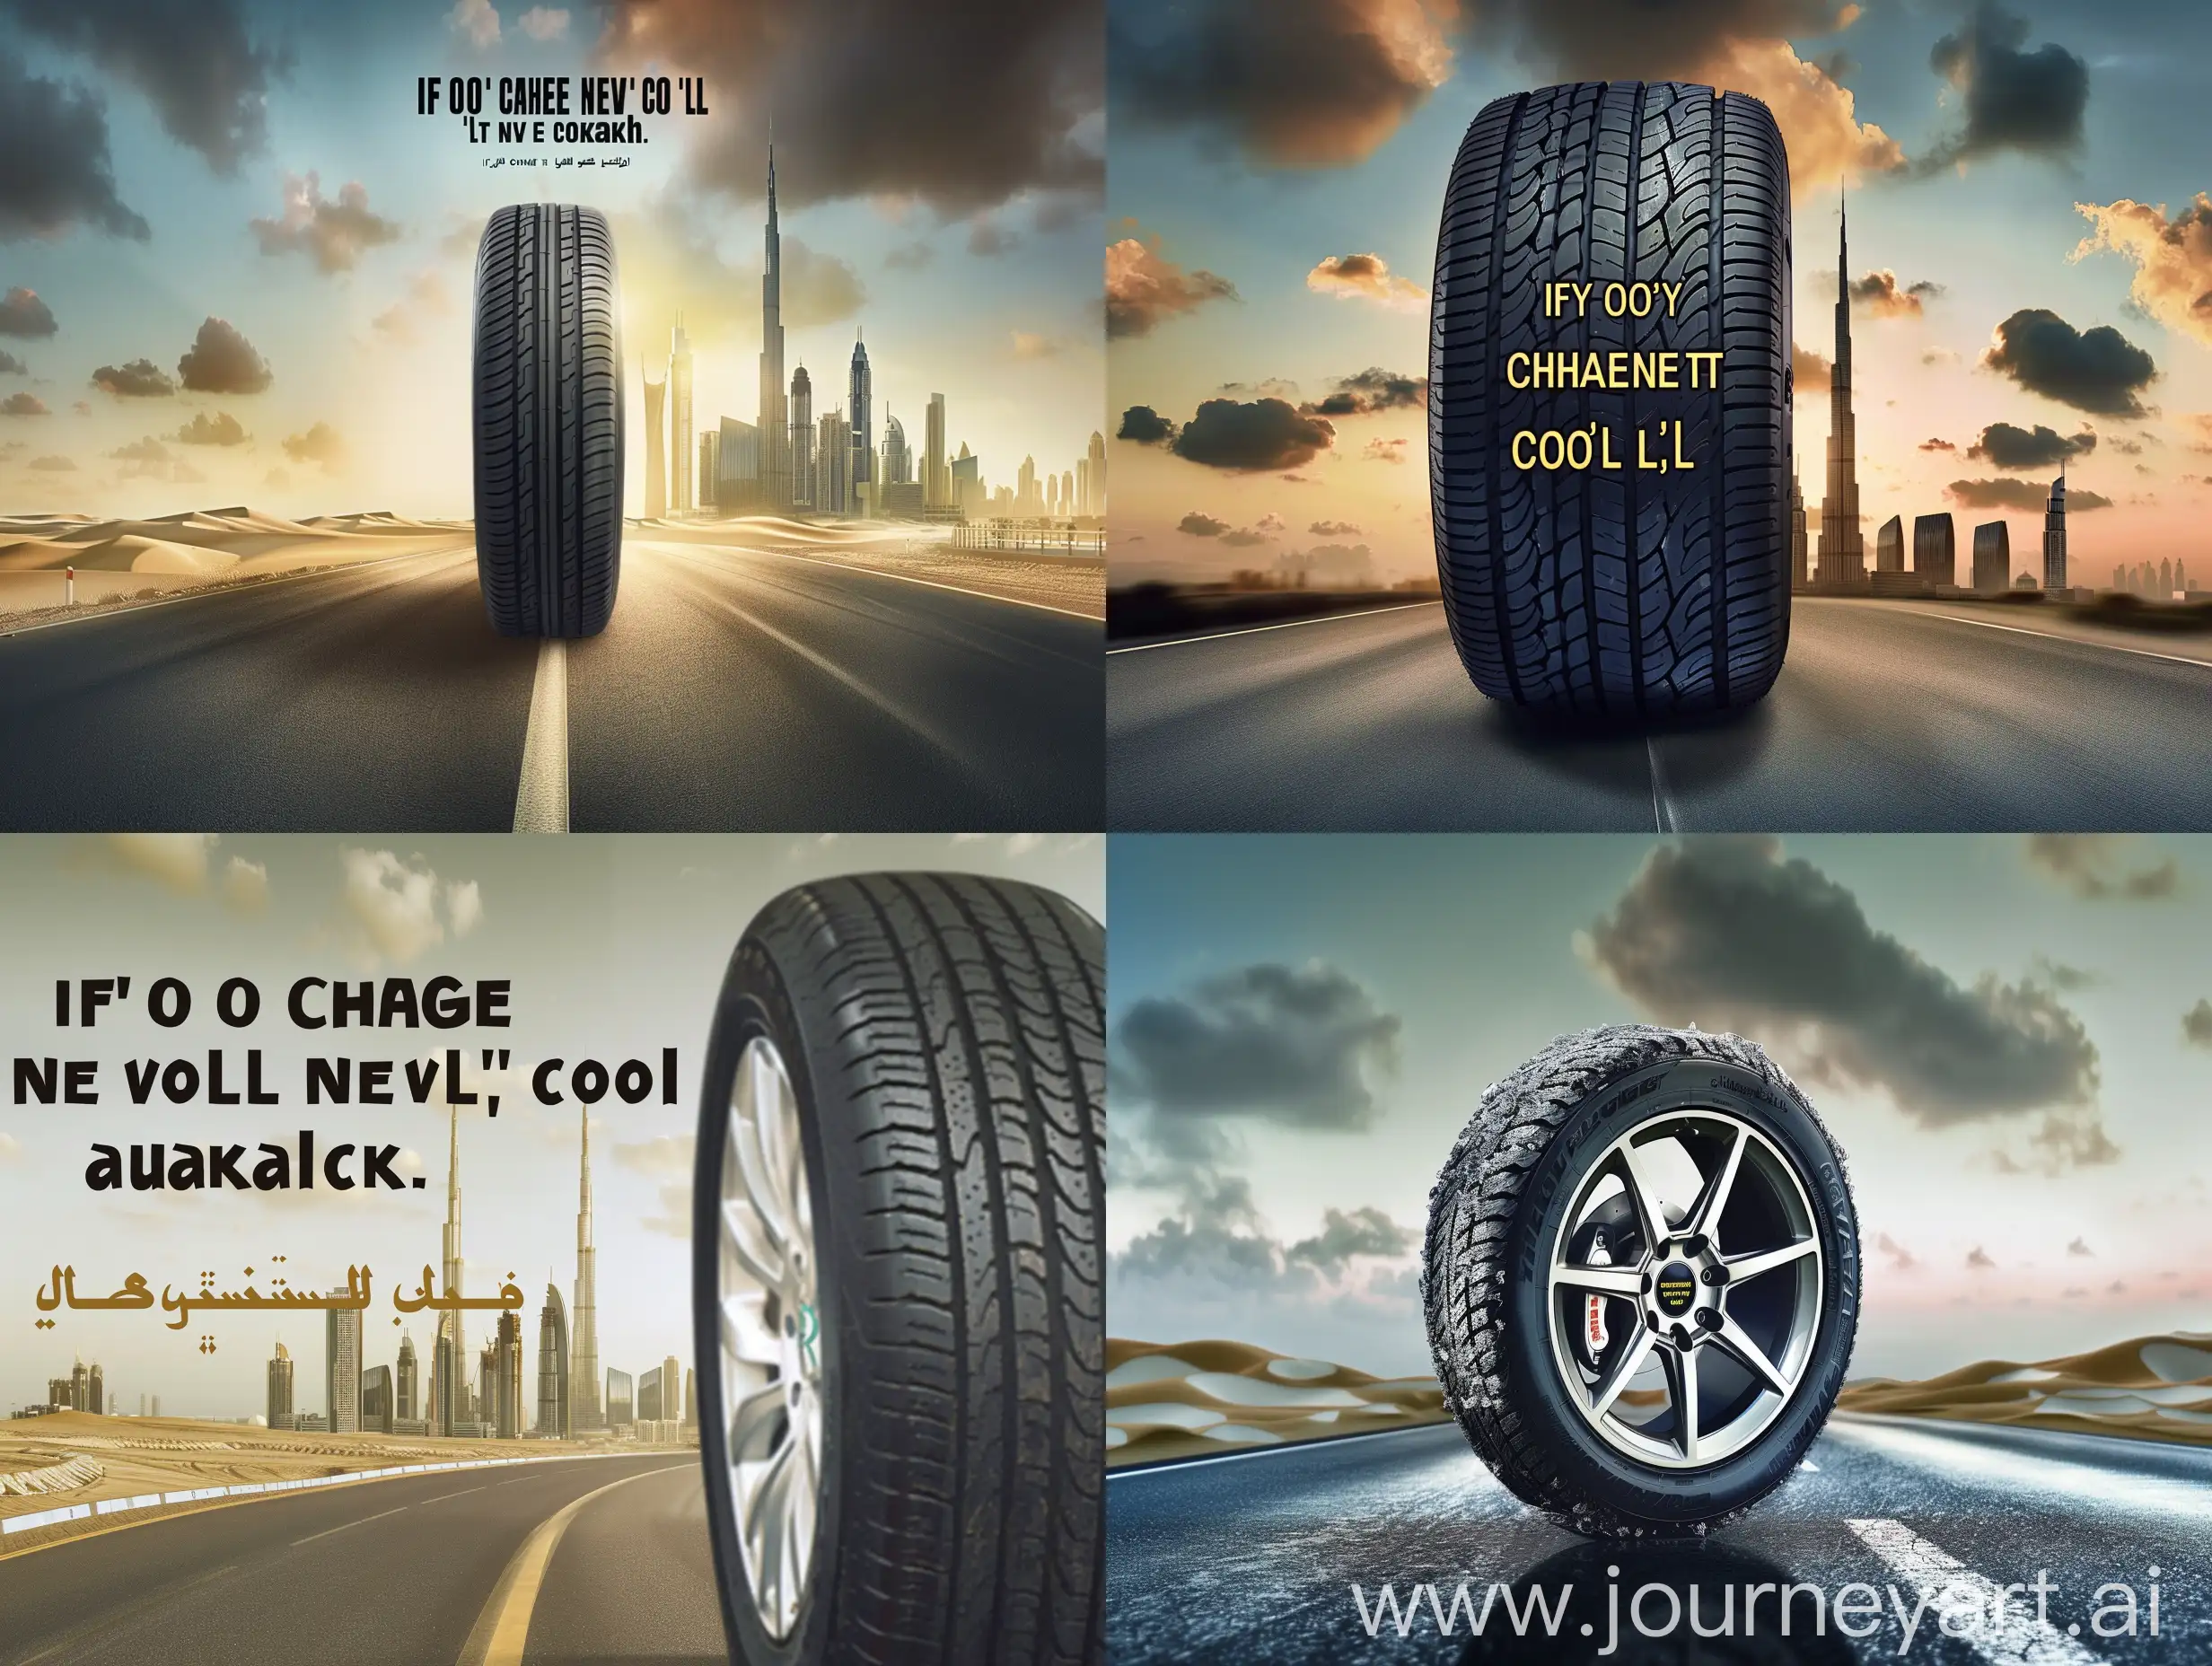 Dynamic-Tire-Advertisement-If-You-Dont-Change-It-Youll-Never-Go-Anywhere